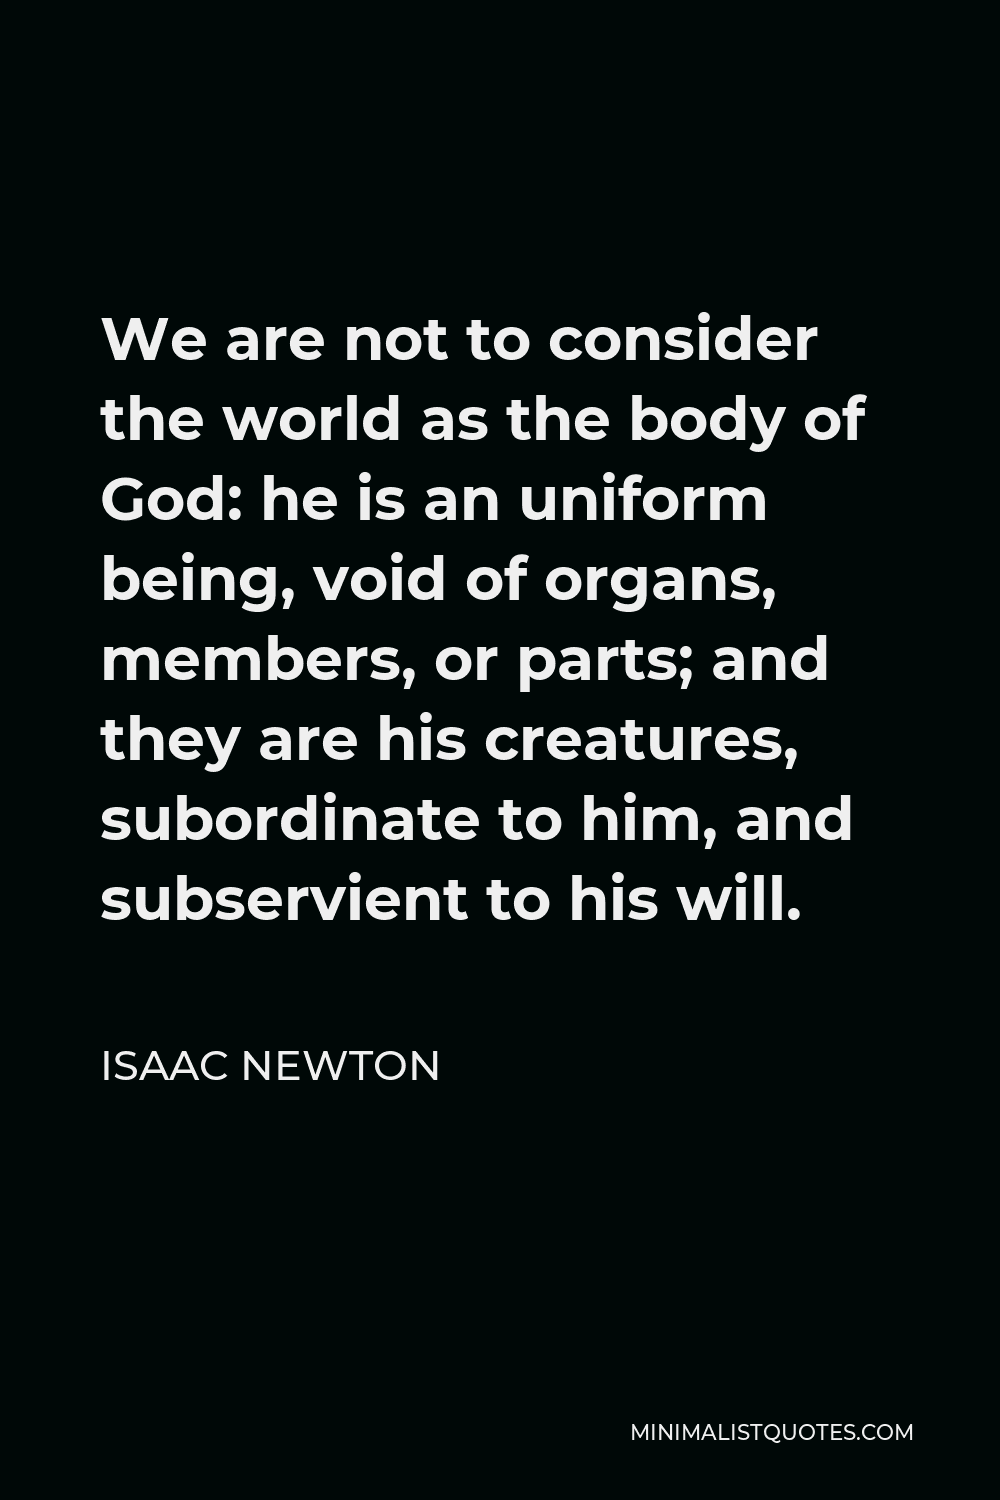 Isaac Newton Quote - We are not to consider the world as the body of God: he is an uniform being, void of organs, members, or parts; and they are his creatures, subordinate to him, and subservient to his will.